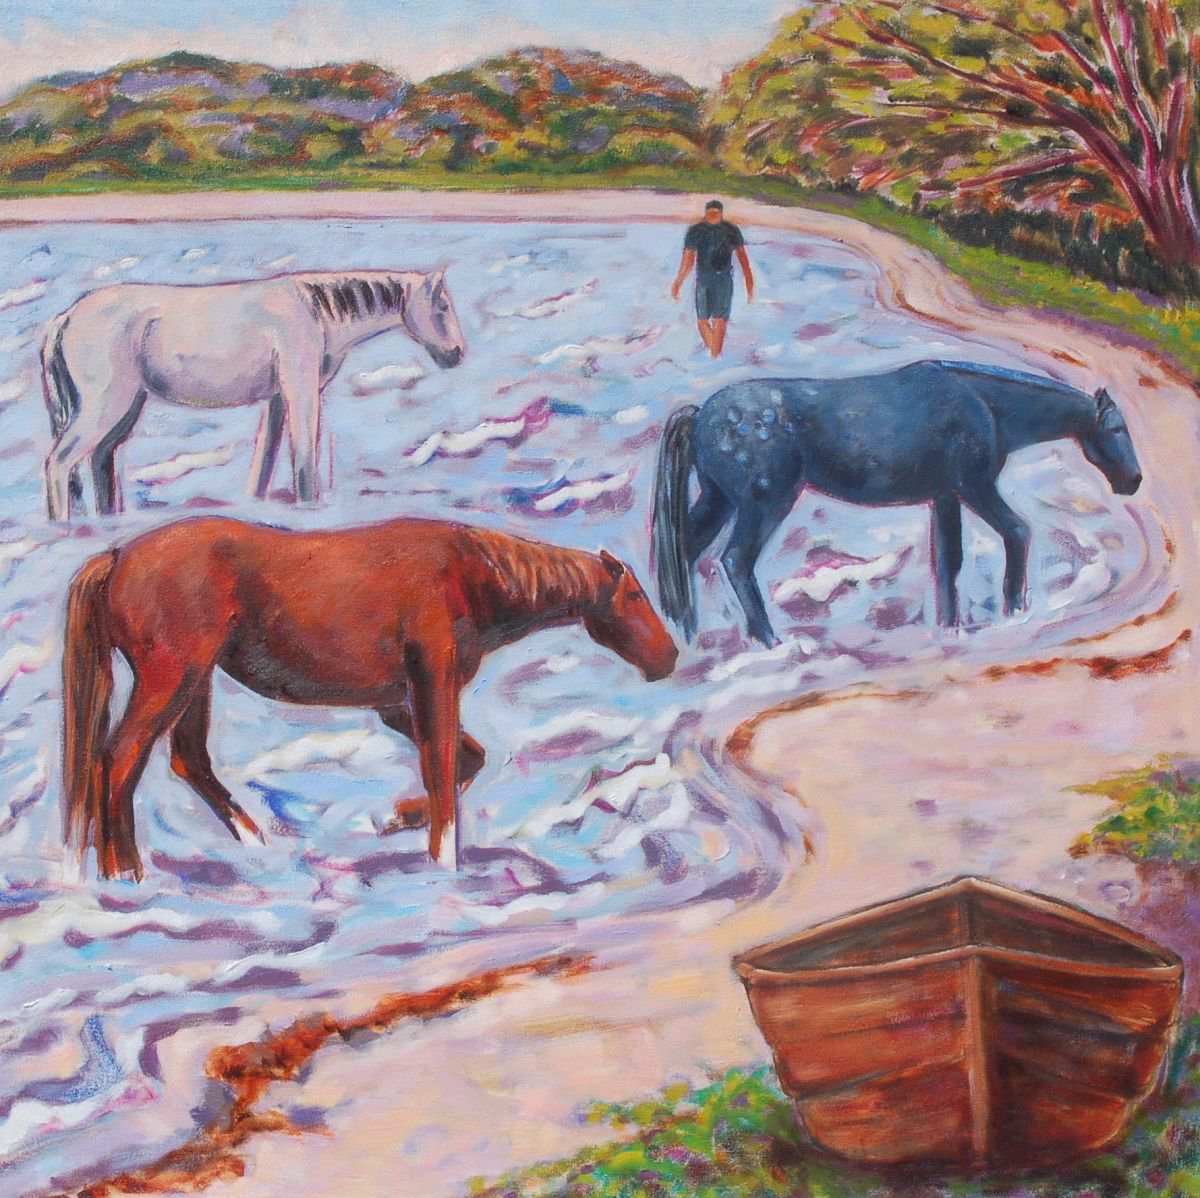 Watering Hole by Lorie Schackmann